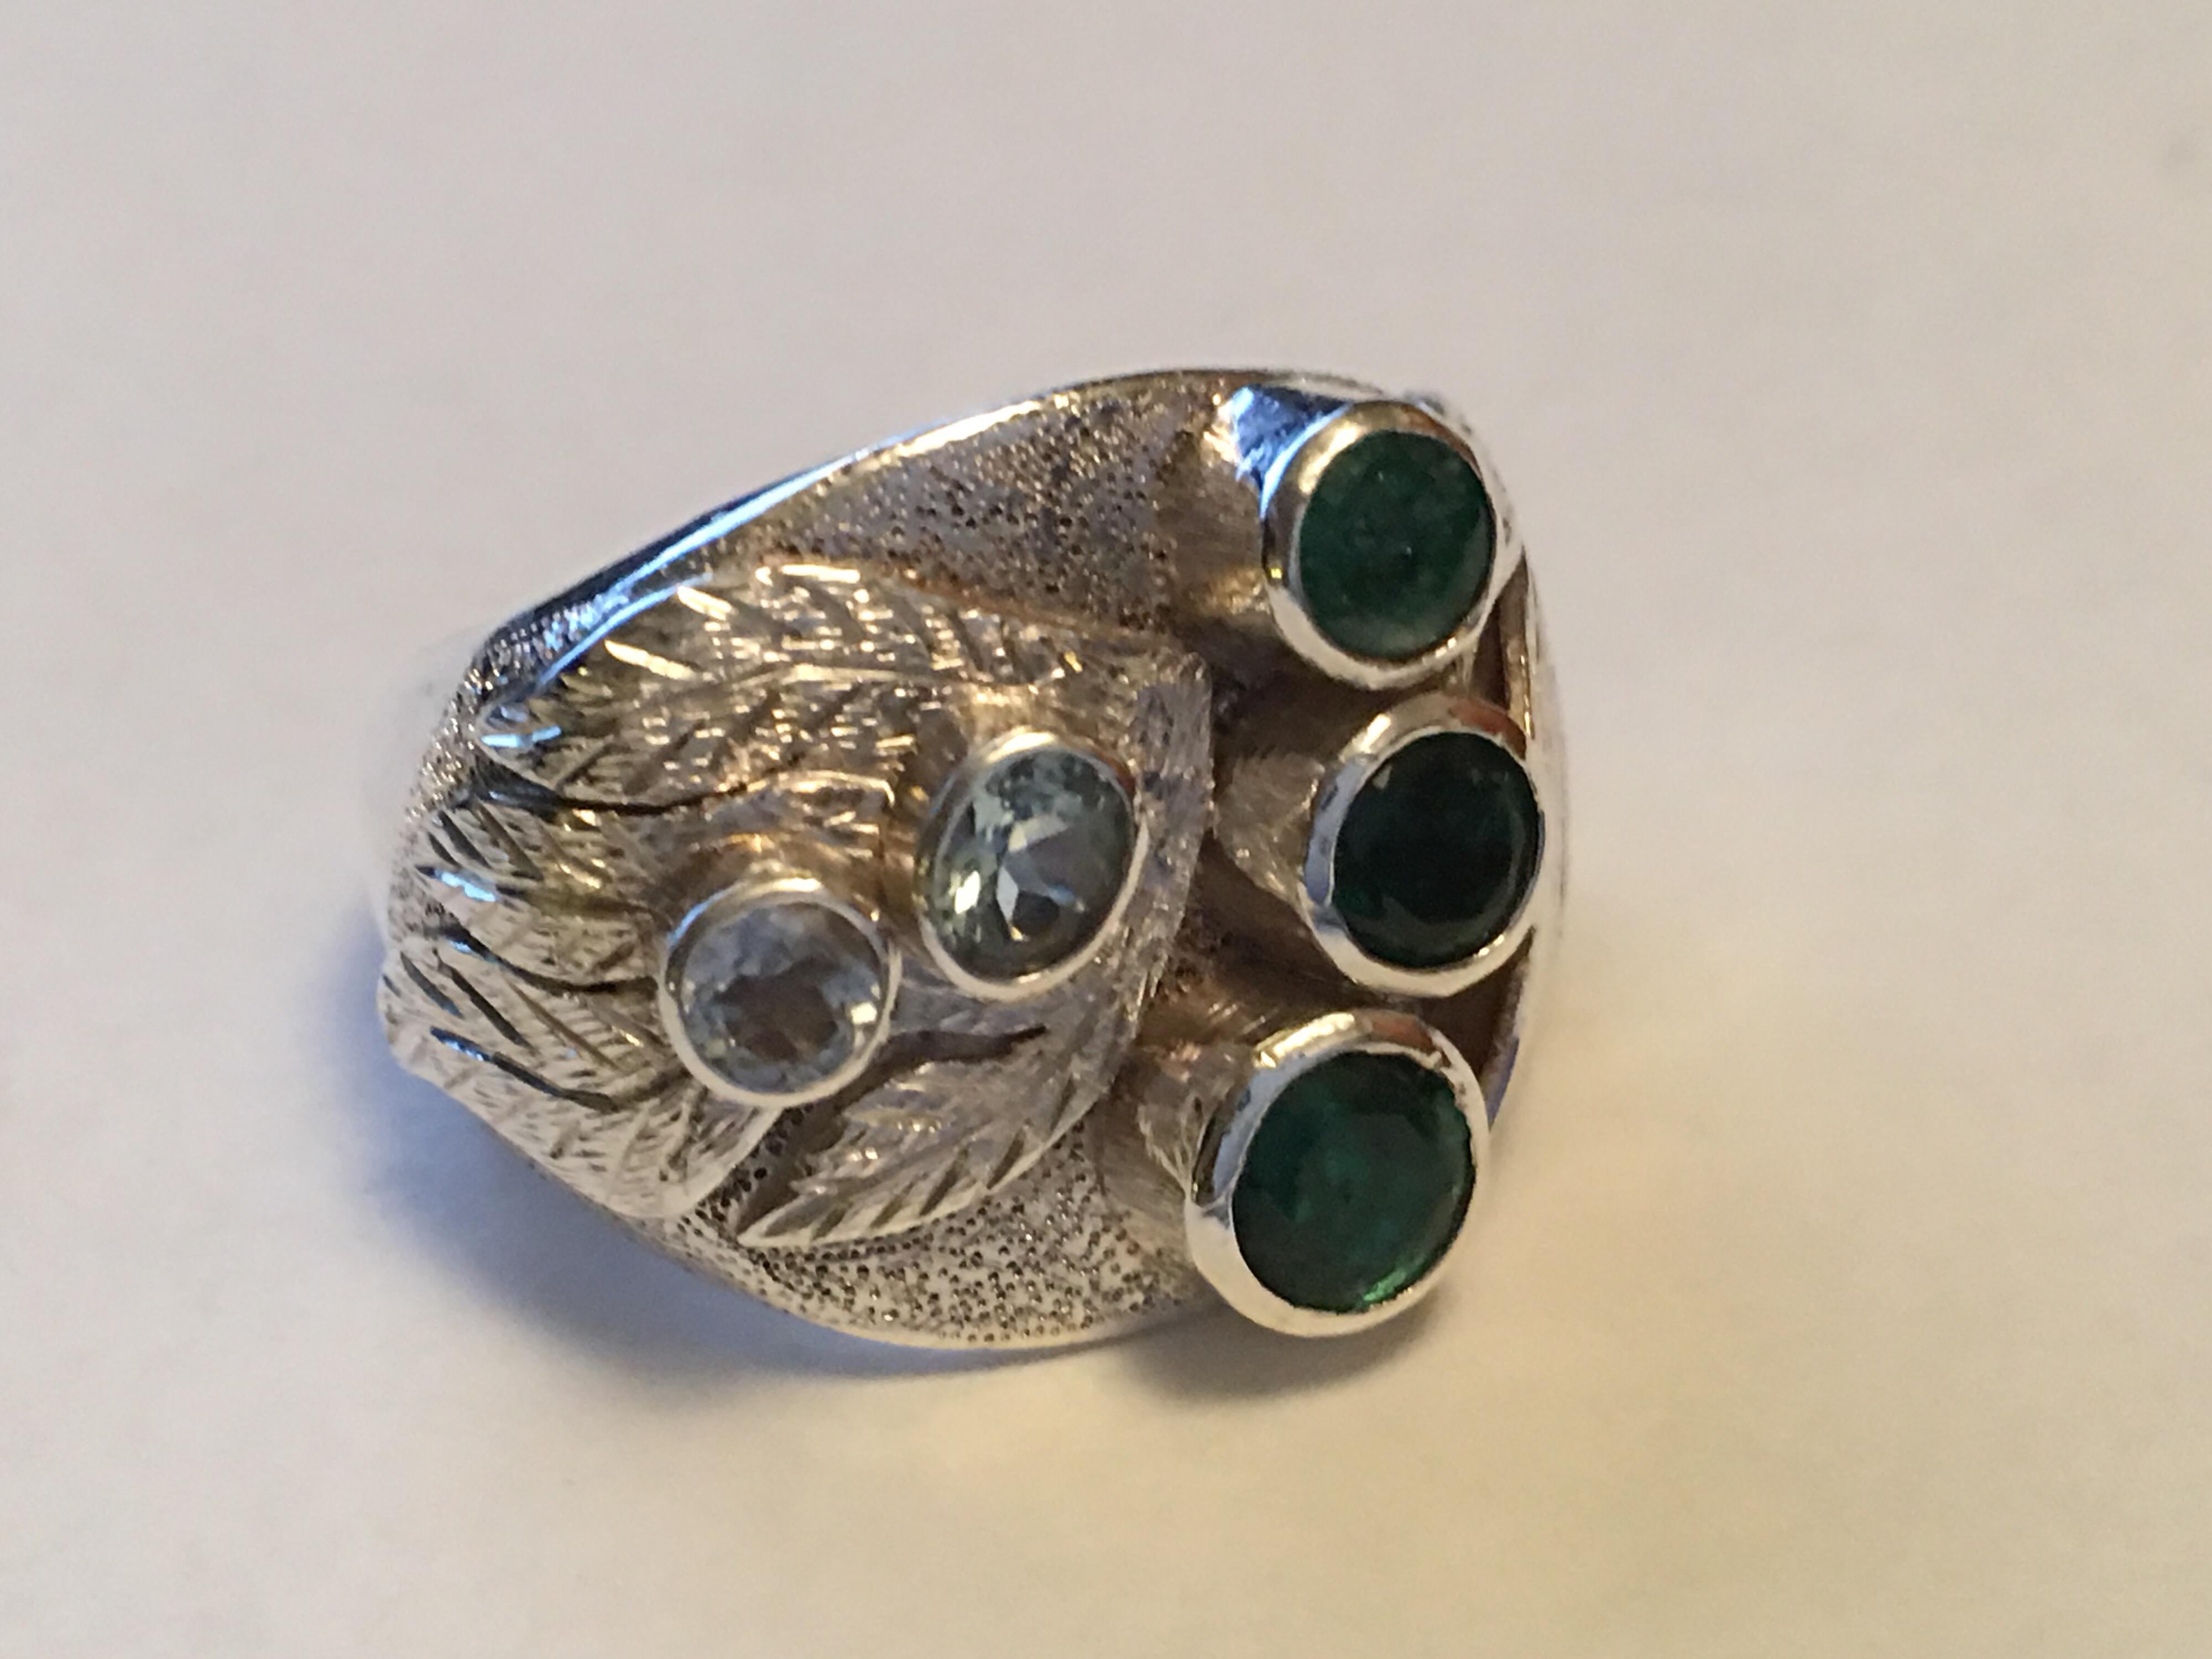 Hand crafted one of a kind sterling silver ring.
5 MM Round and other two are 3.5 MM Natural Emerald with two aquamarine.
Solid ring is unisex,
Size of the ring is 8.5 but can be resized.
